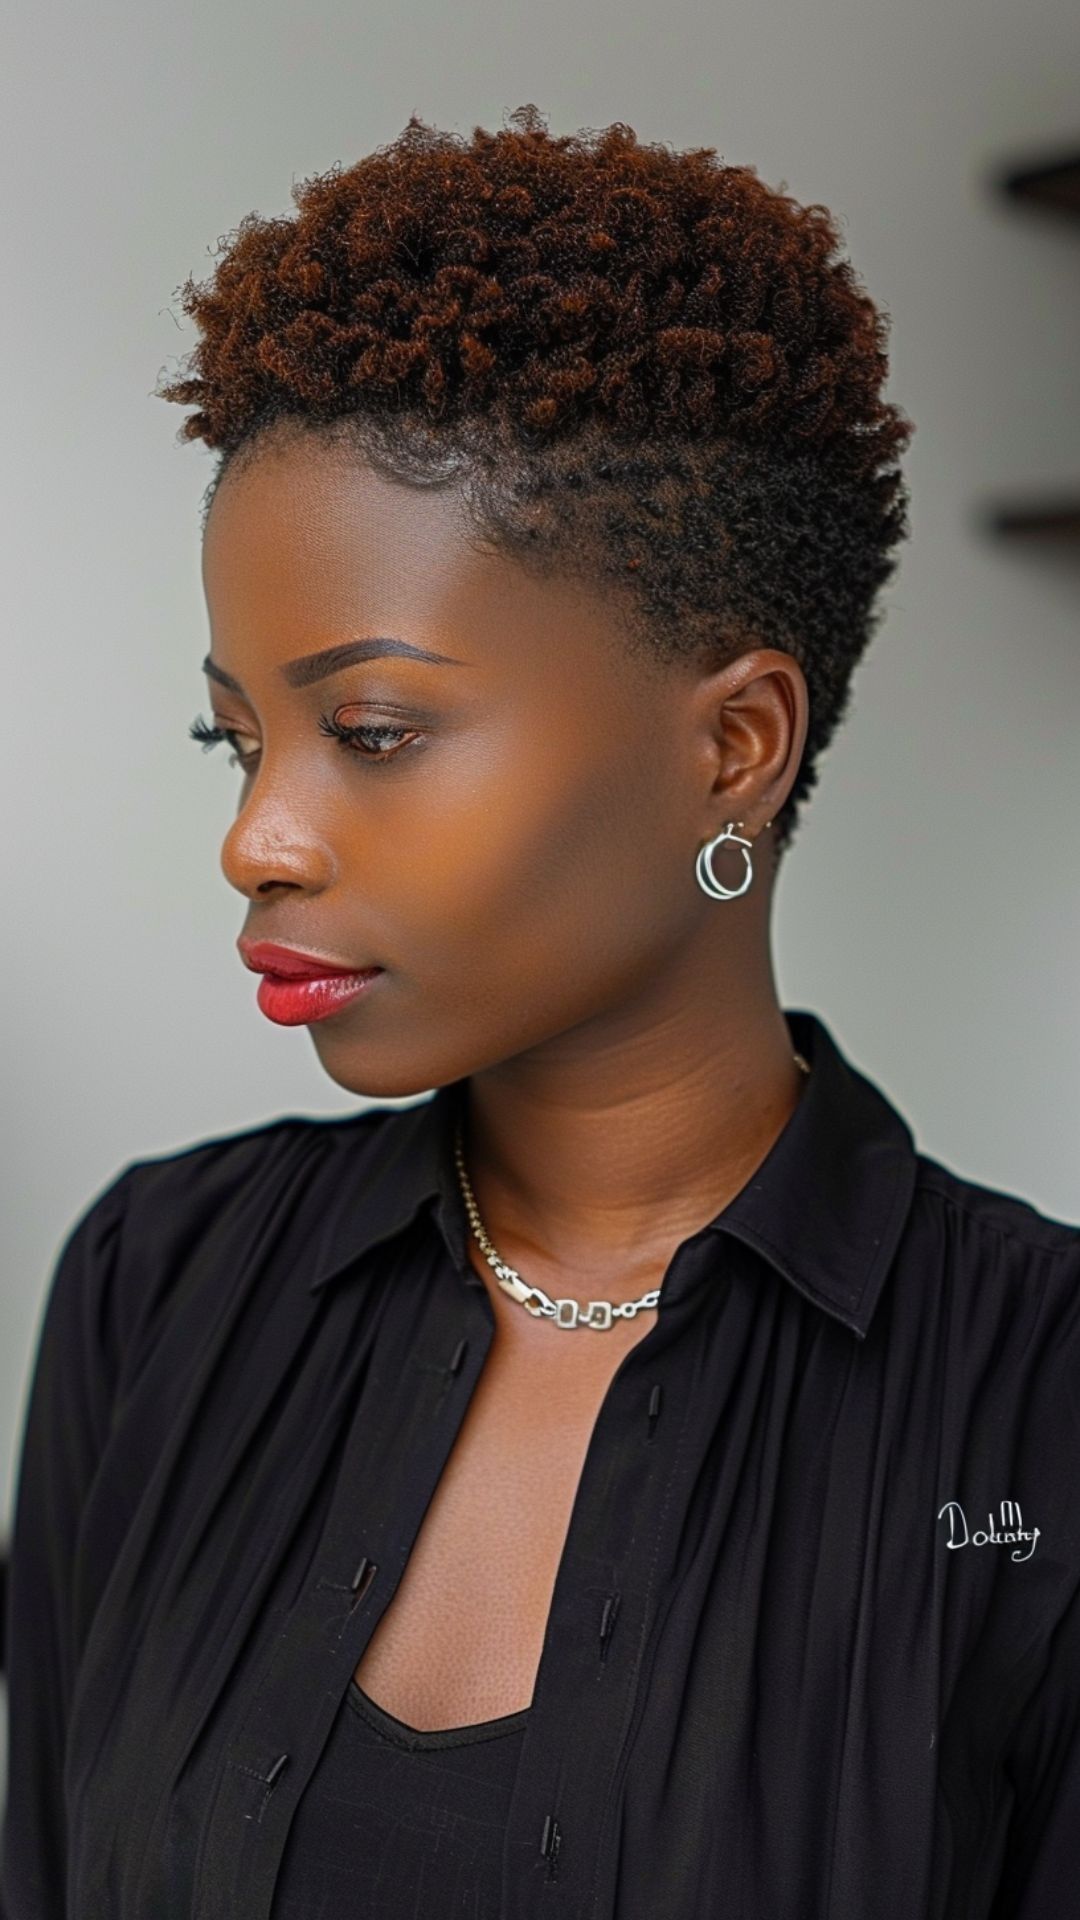 Rock your natural beauty with stunning TWA hairstyles